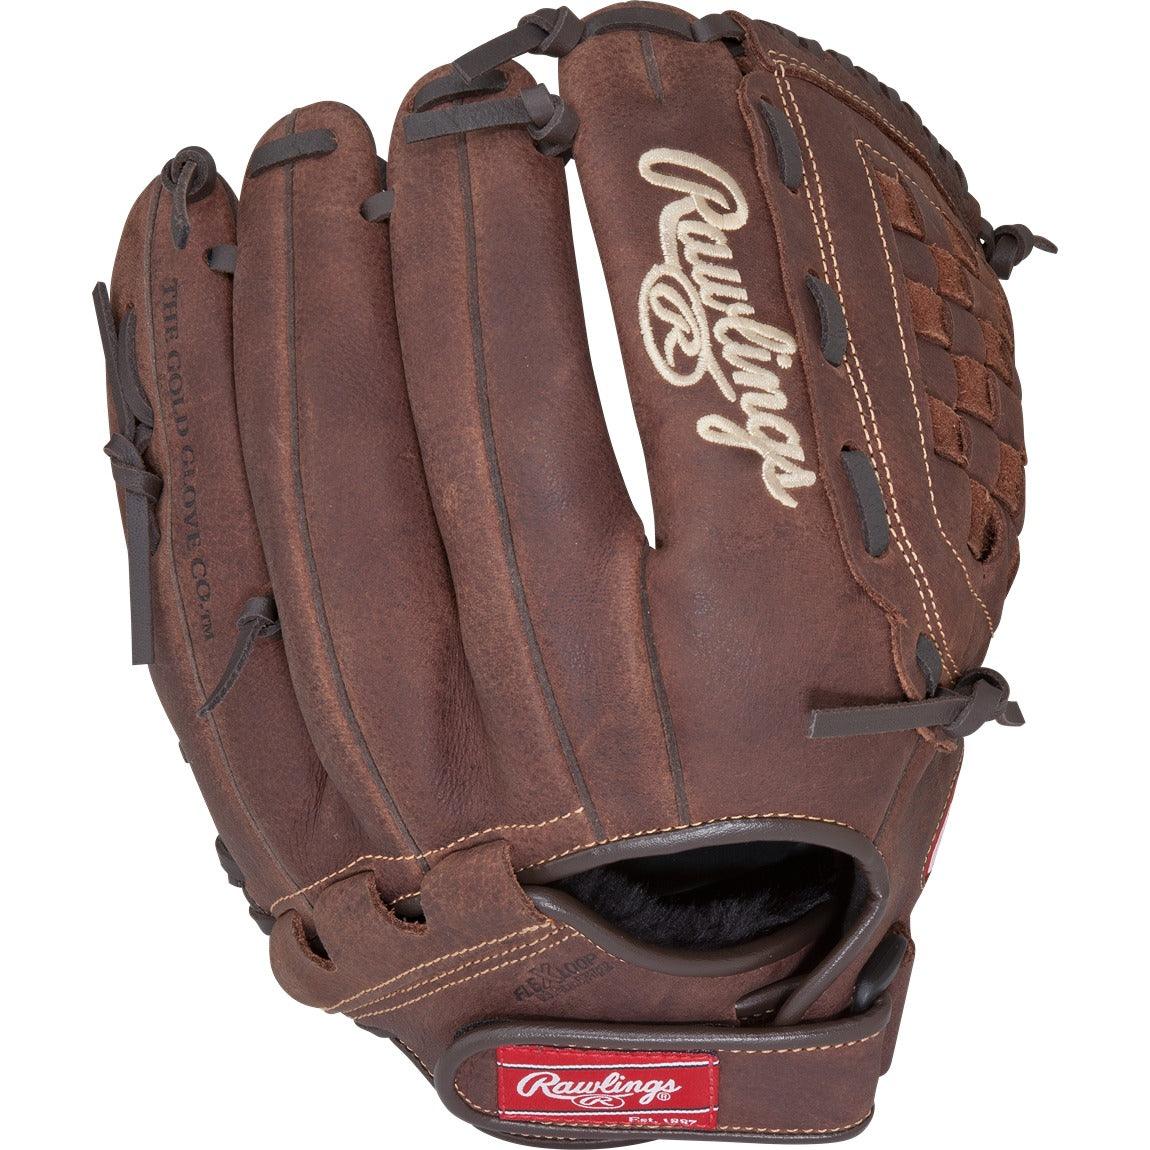 Player Preferred 12.5" Adult Softball Glove - Sports Excellence